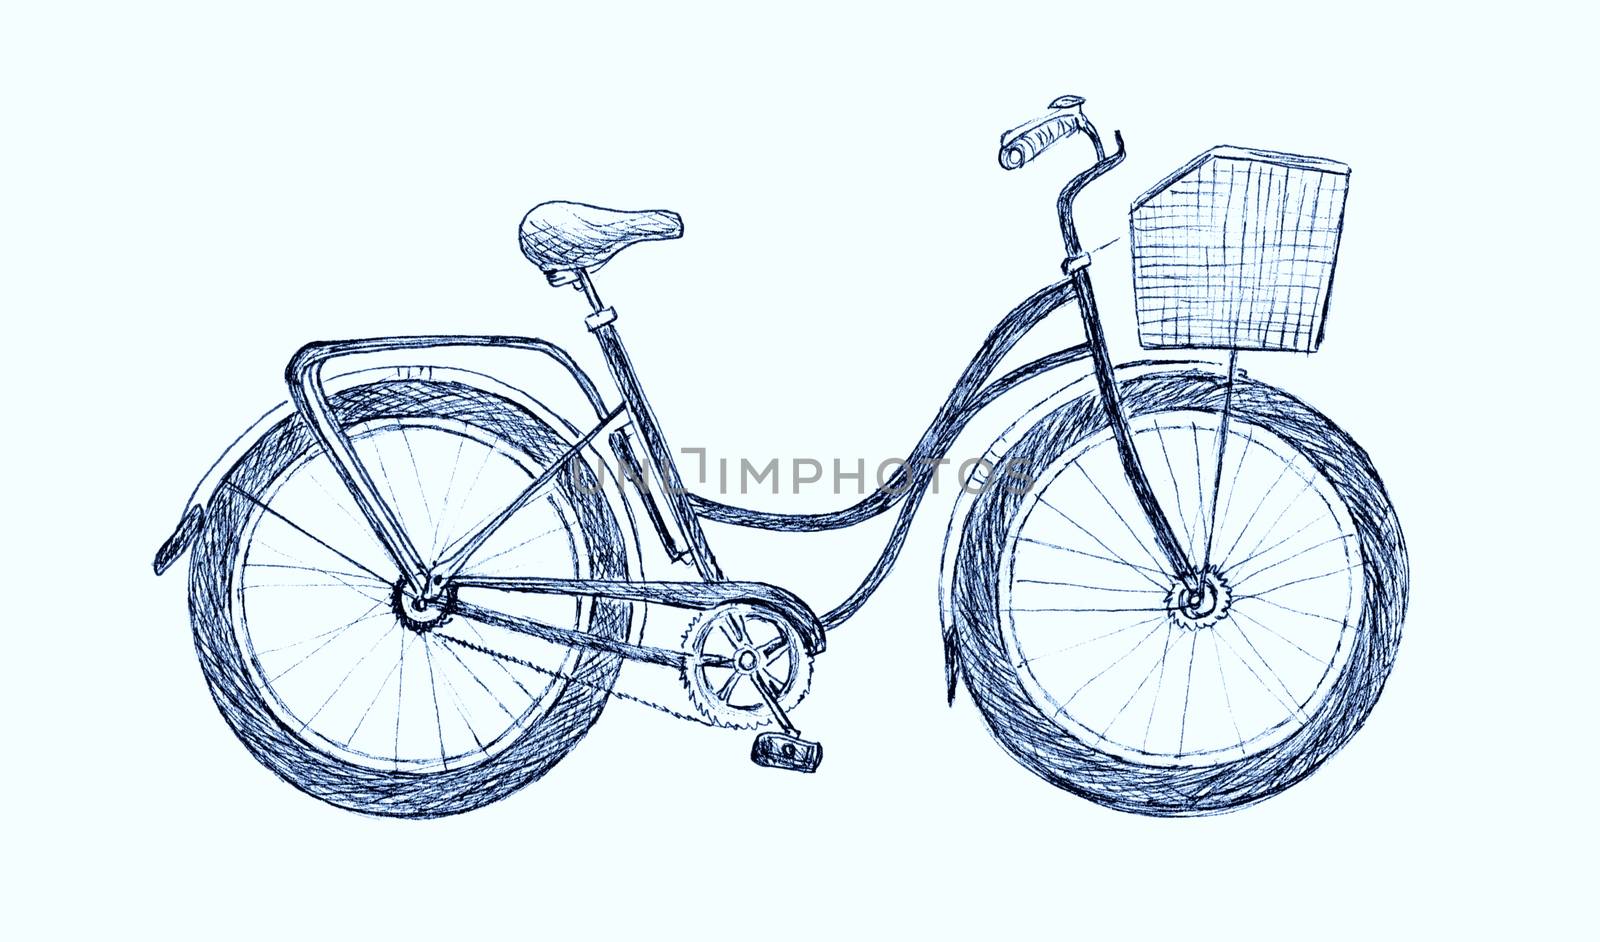 Vintage road bicycle hand drawn illustration. Eco transport sketch isolated on light background. by sshisshka